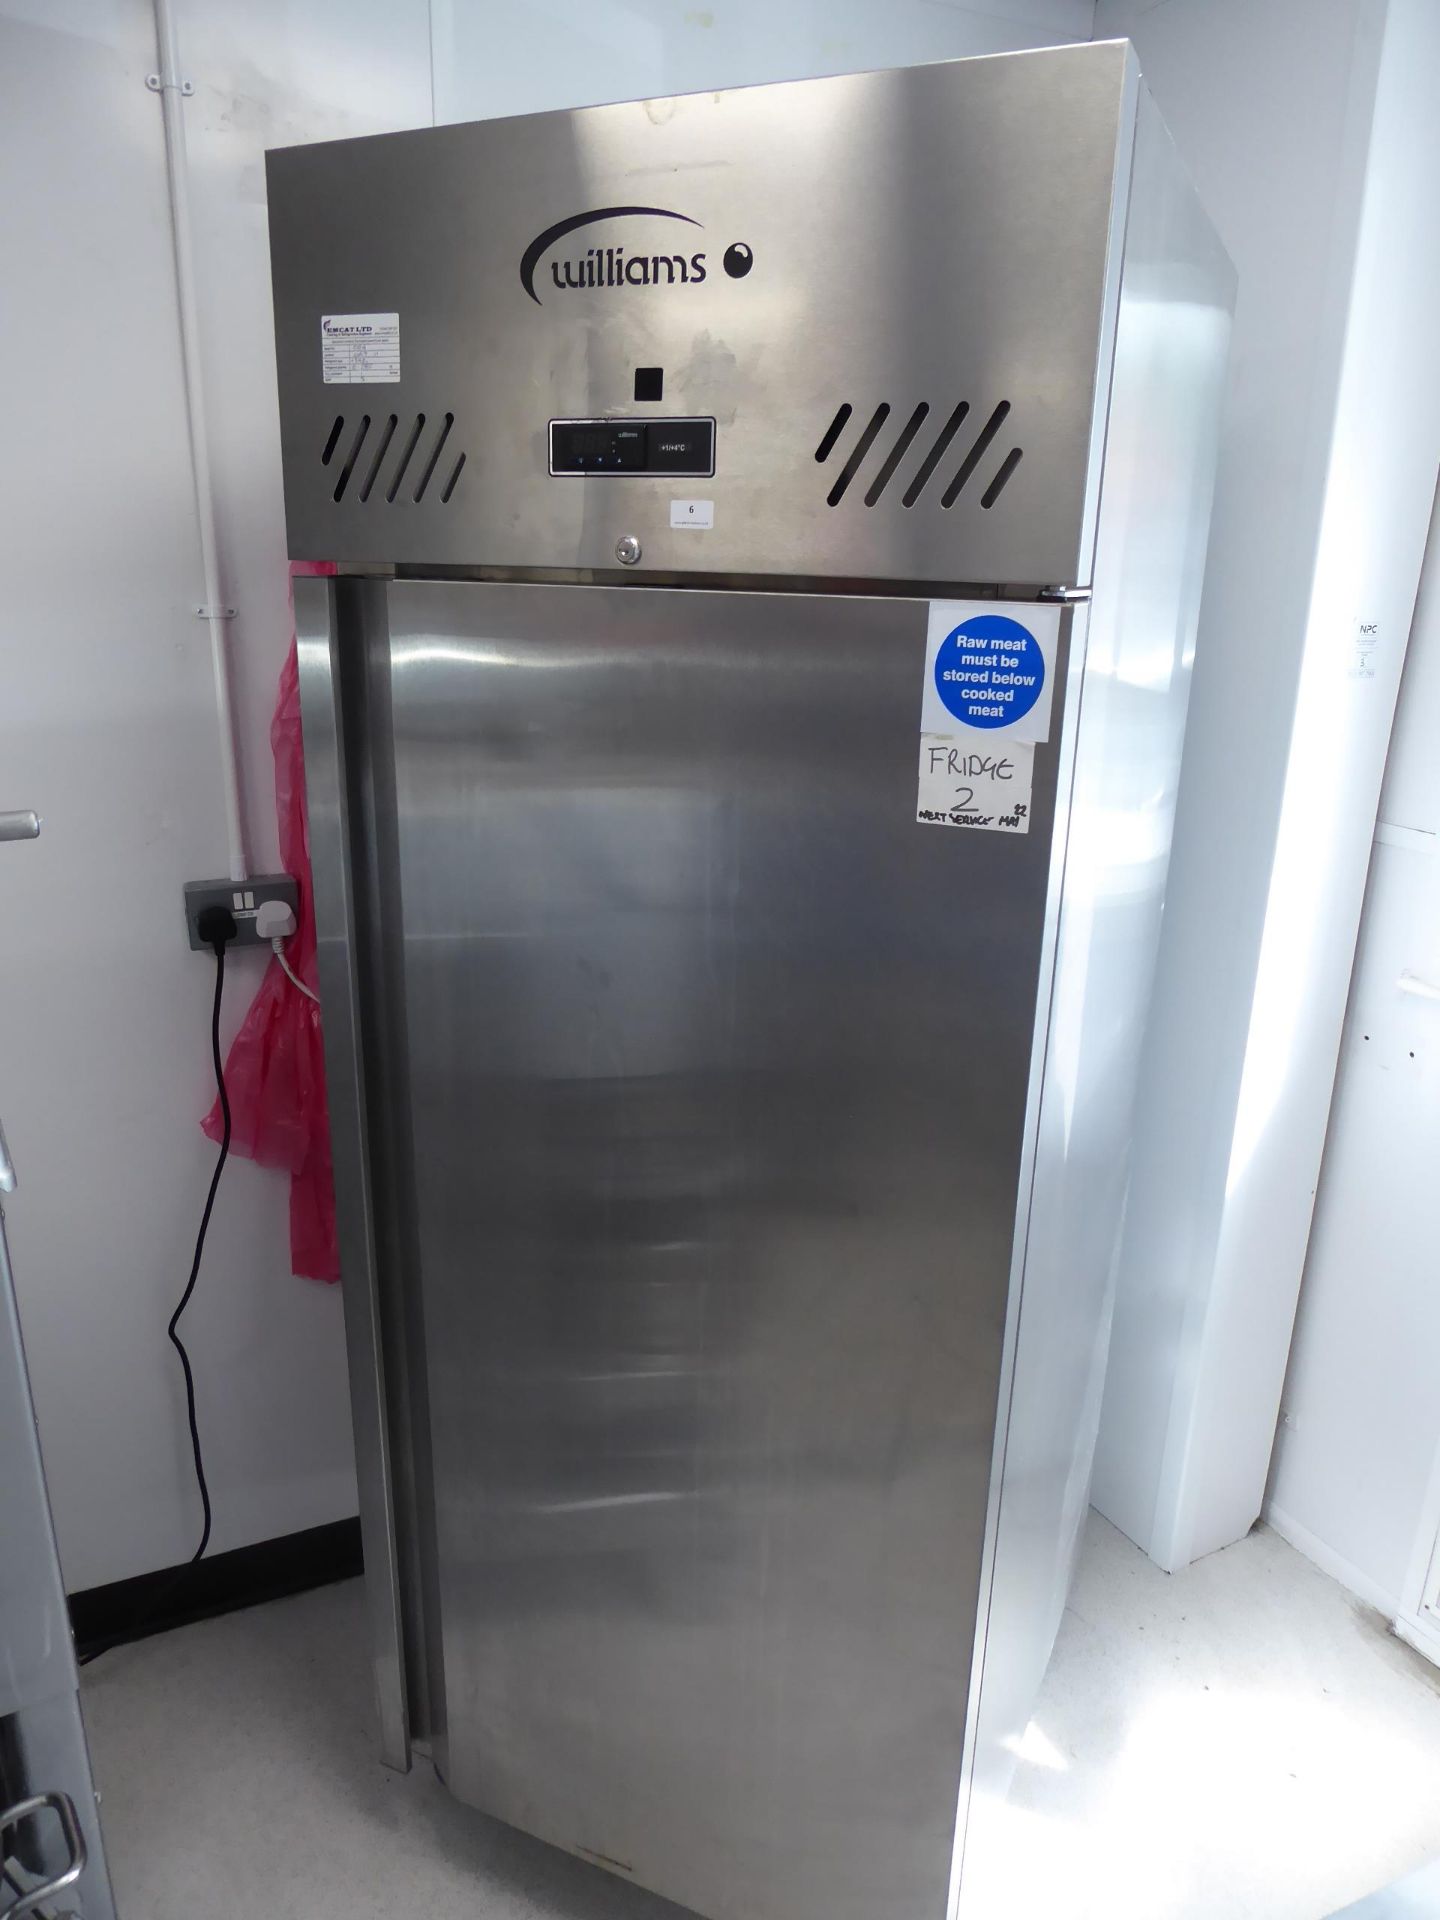 * Williams S/S upright chiller. HJ1SA. Subject to a regular maintenance contract.